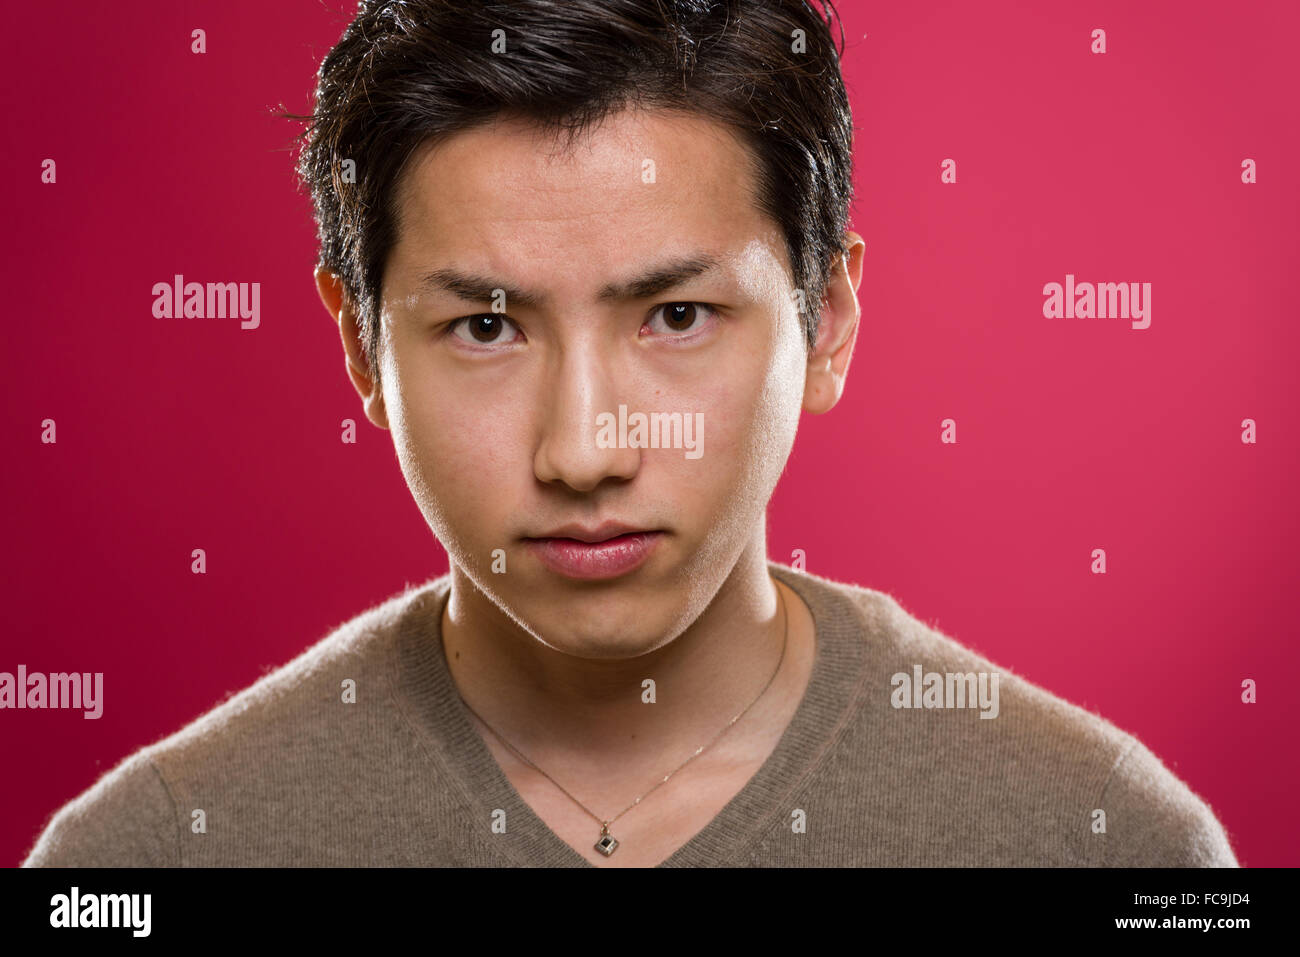 A headshot of a young handsome Japanese man. Stock Photo